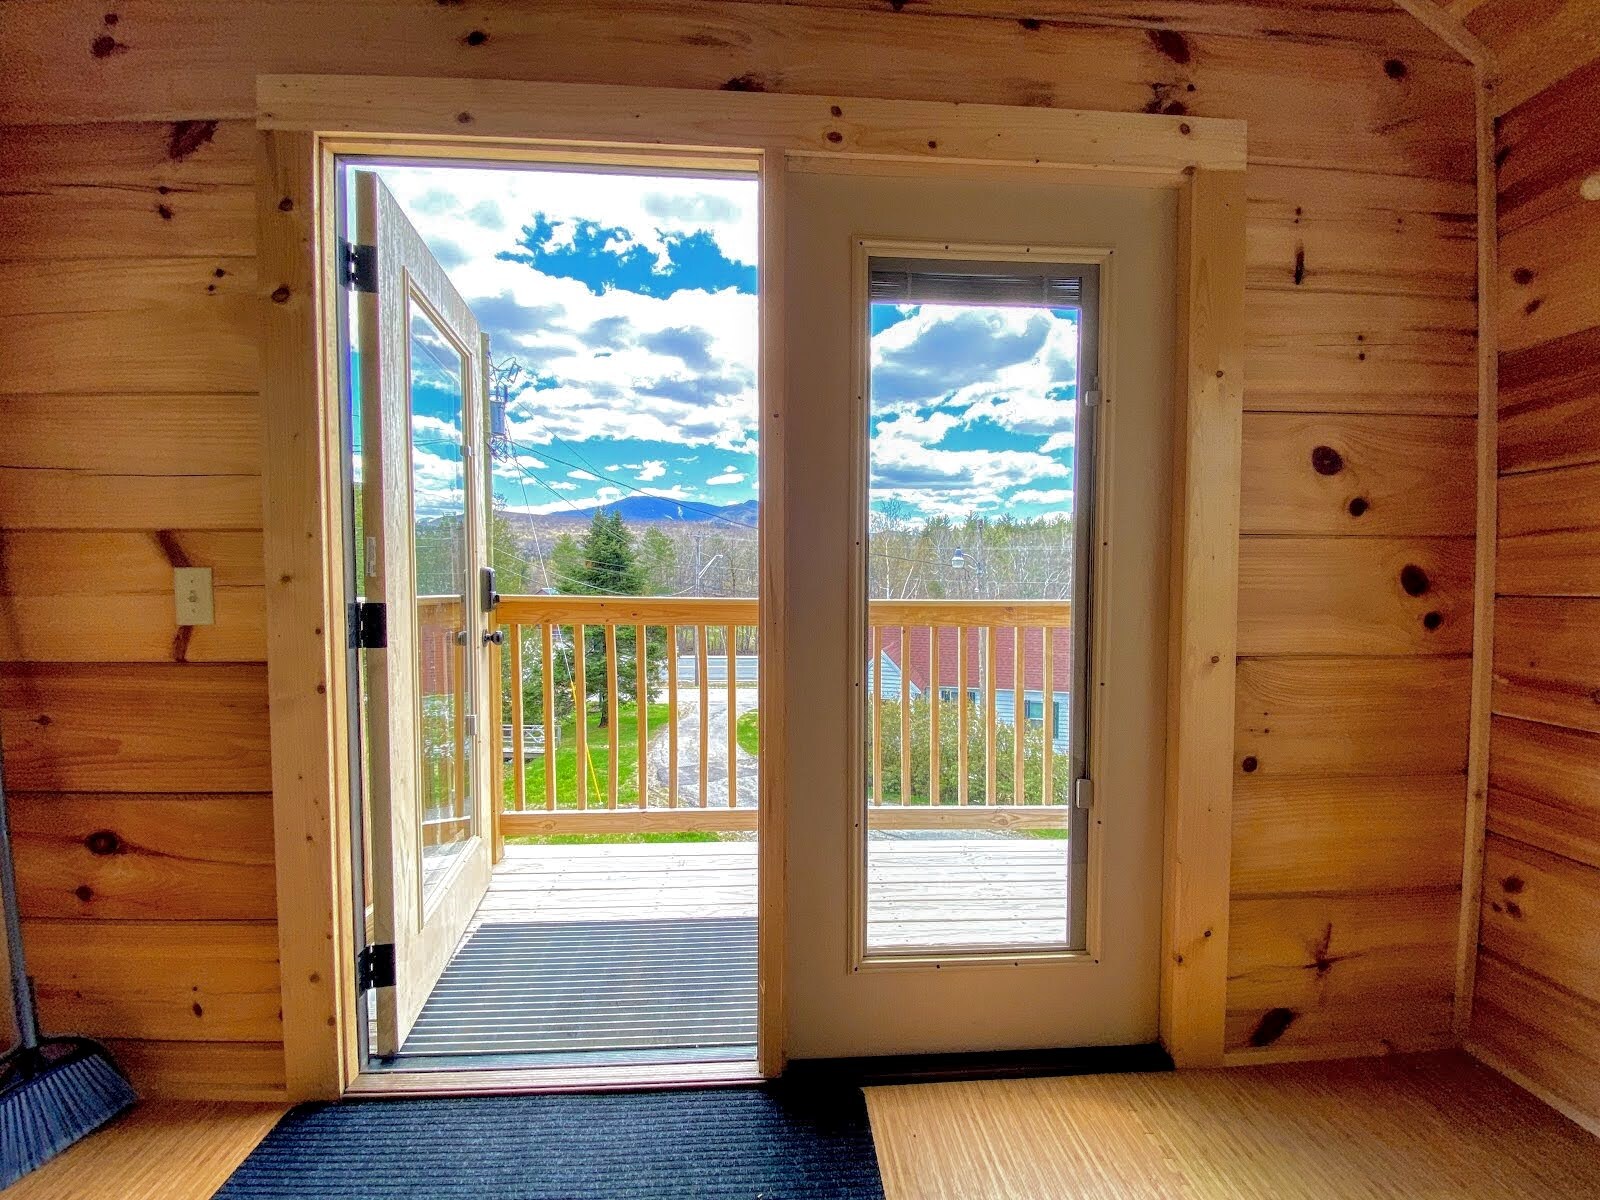 Property Image 1 - Awesome "Tiny Home" with A/C, Mountain Views, Minutes to Skiing, Hiking, Attractions